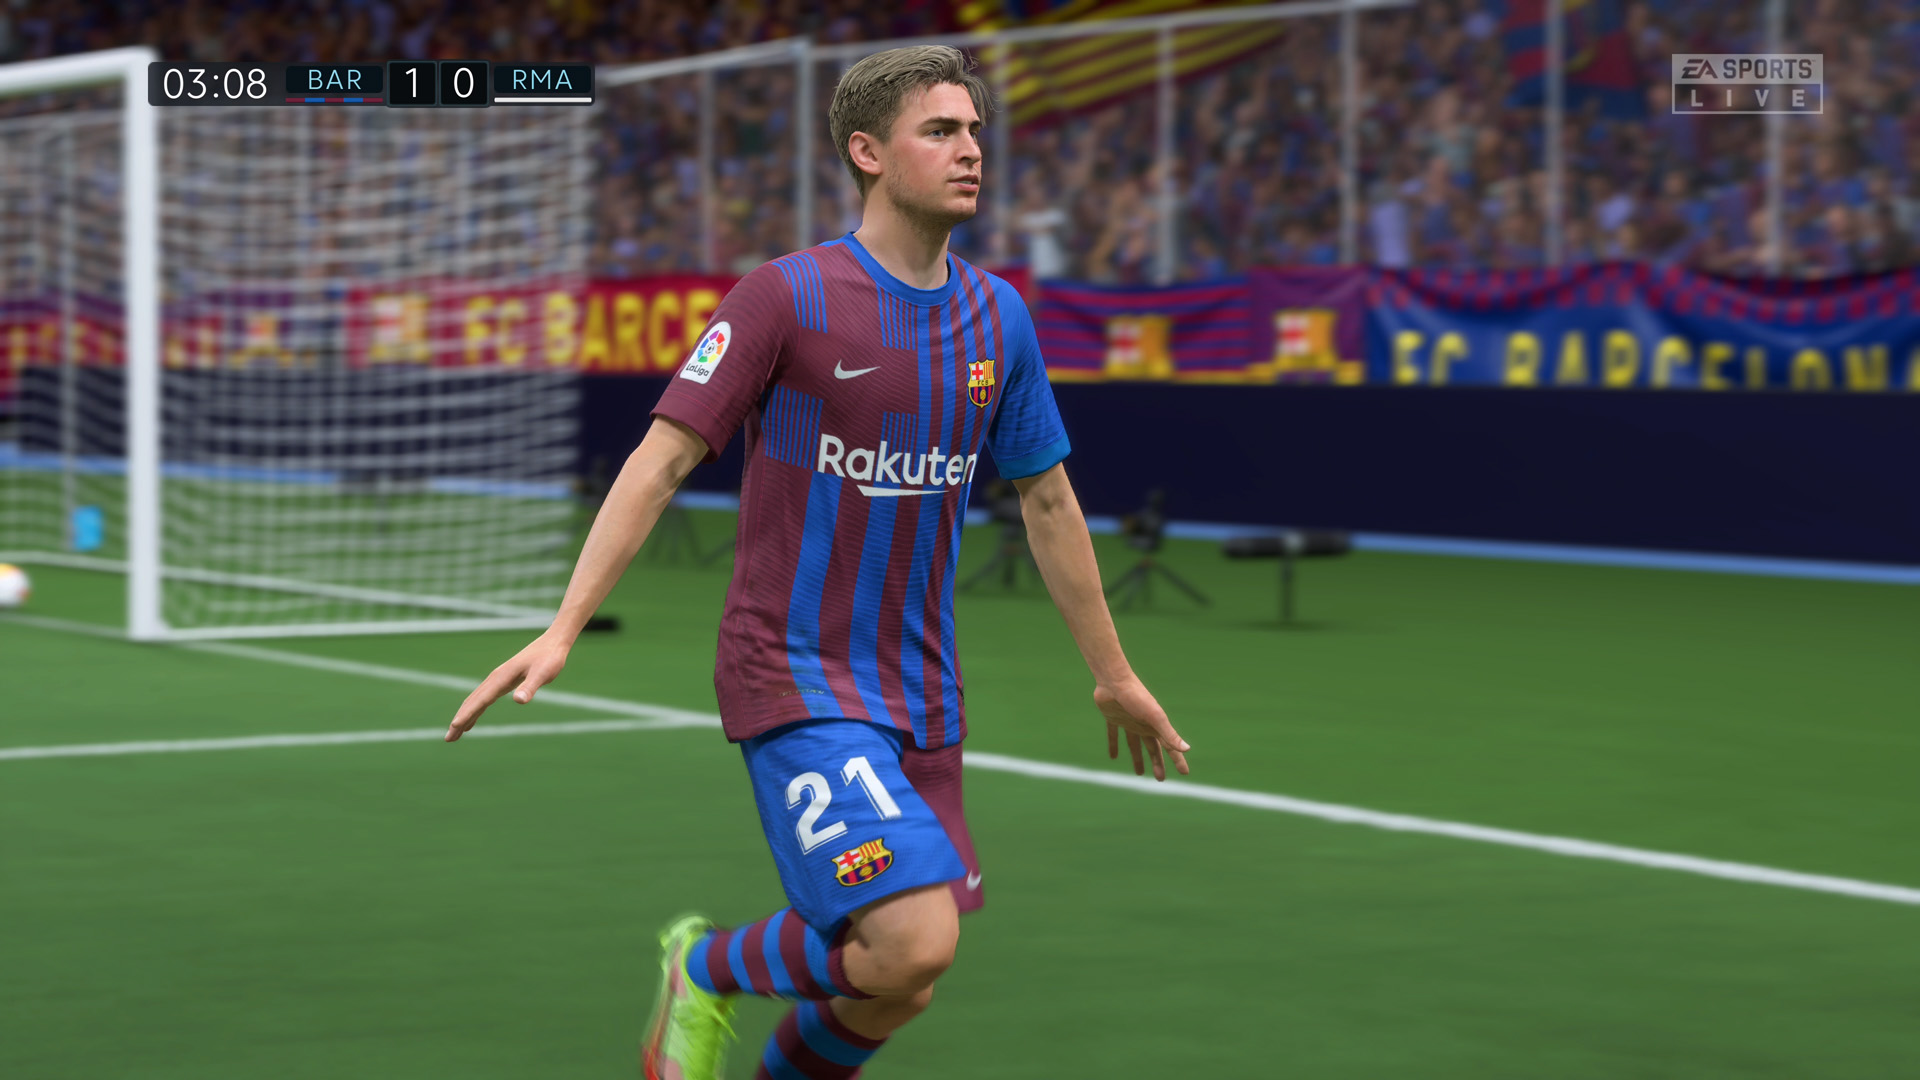 FIFA scripting lawsuit withdrawn after EA provides detailed